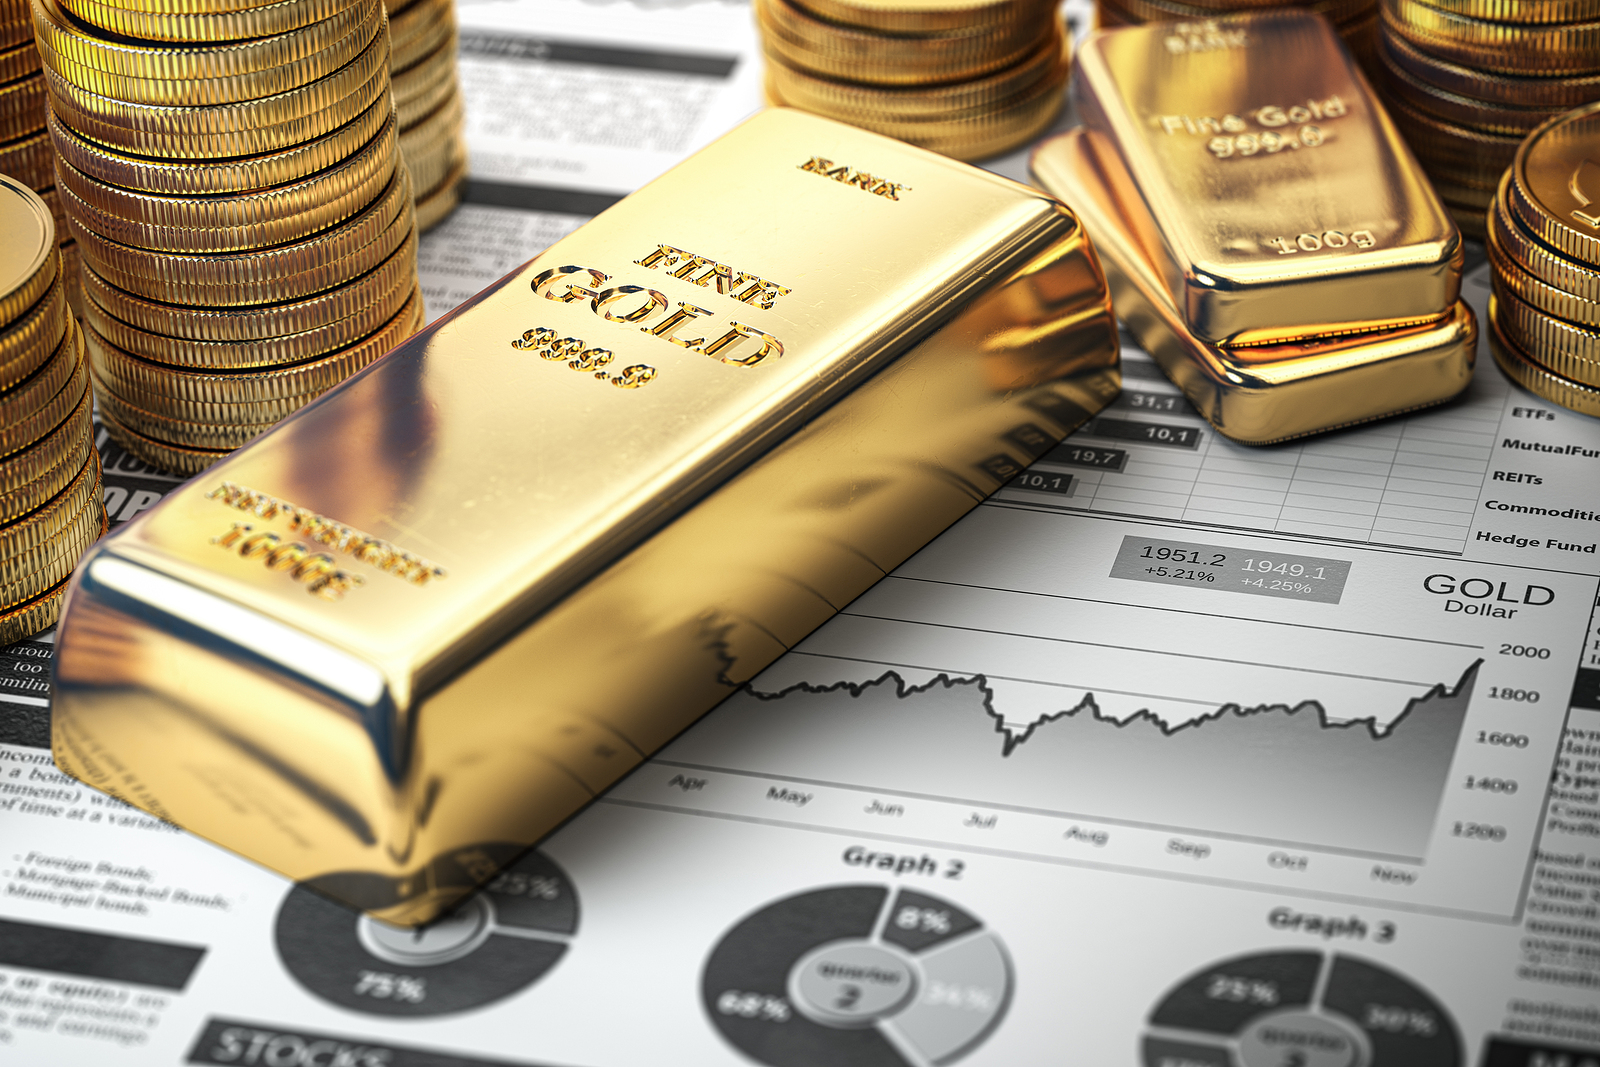 The Top 5 Sites To Buy Gold Online - BuyNetGold.com